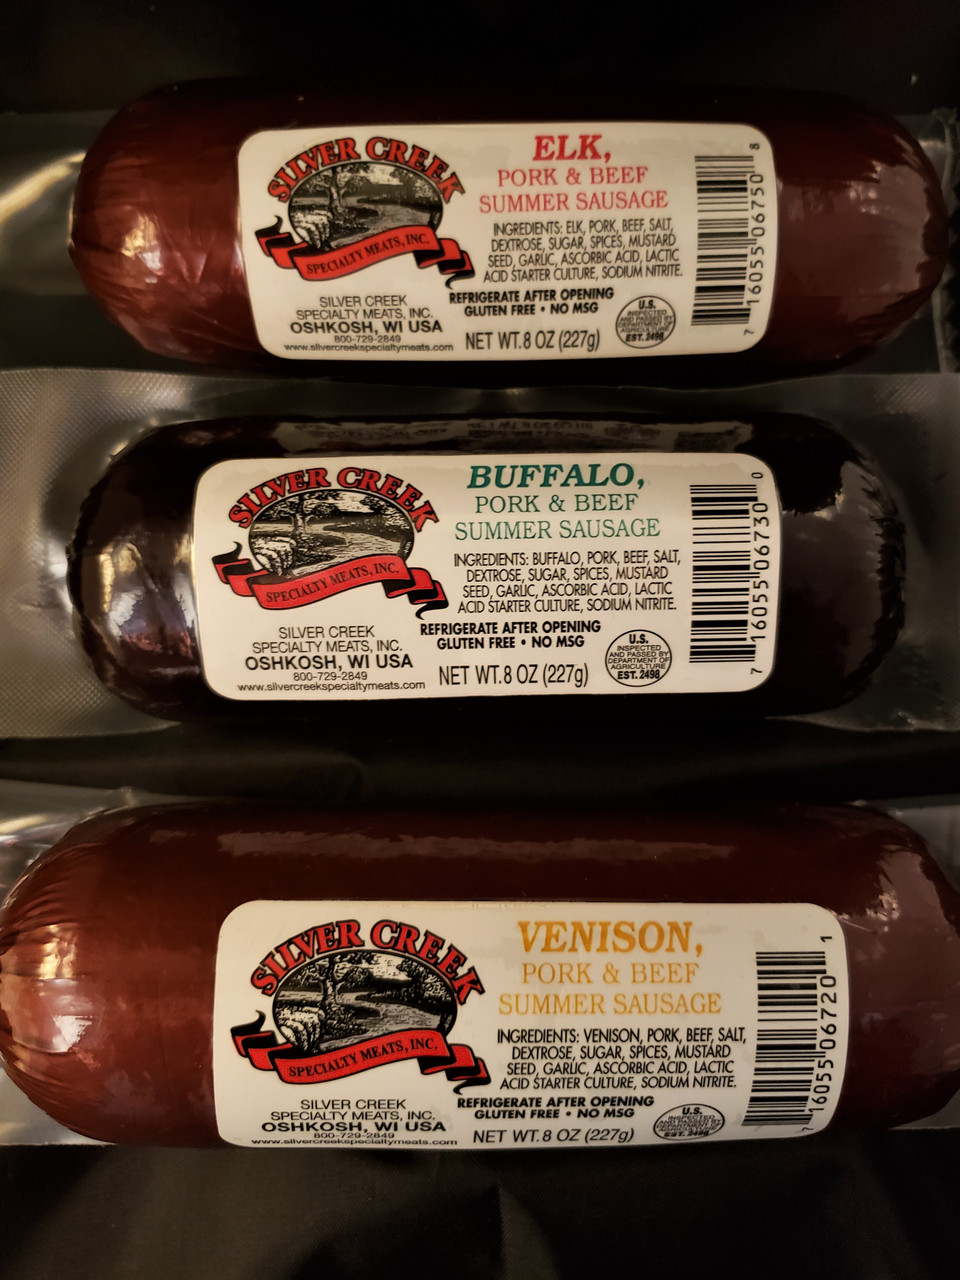 Elk and Buffalo sausage available in 8 oz sizes too